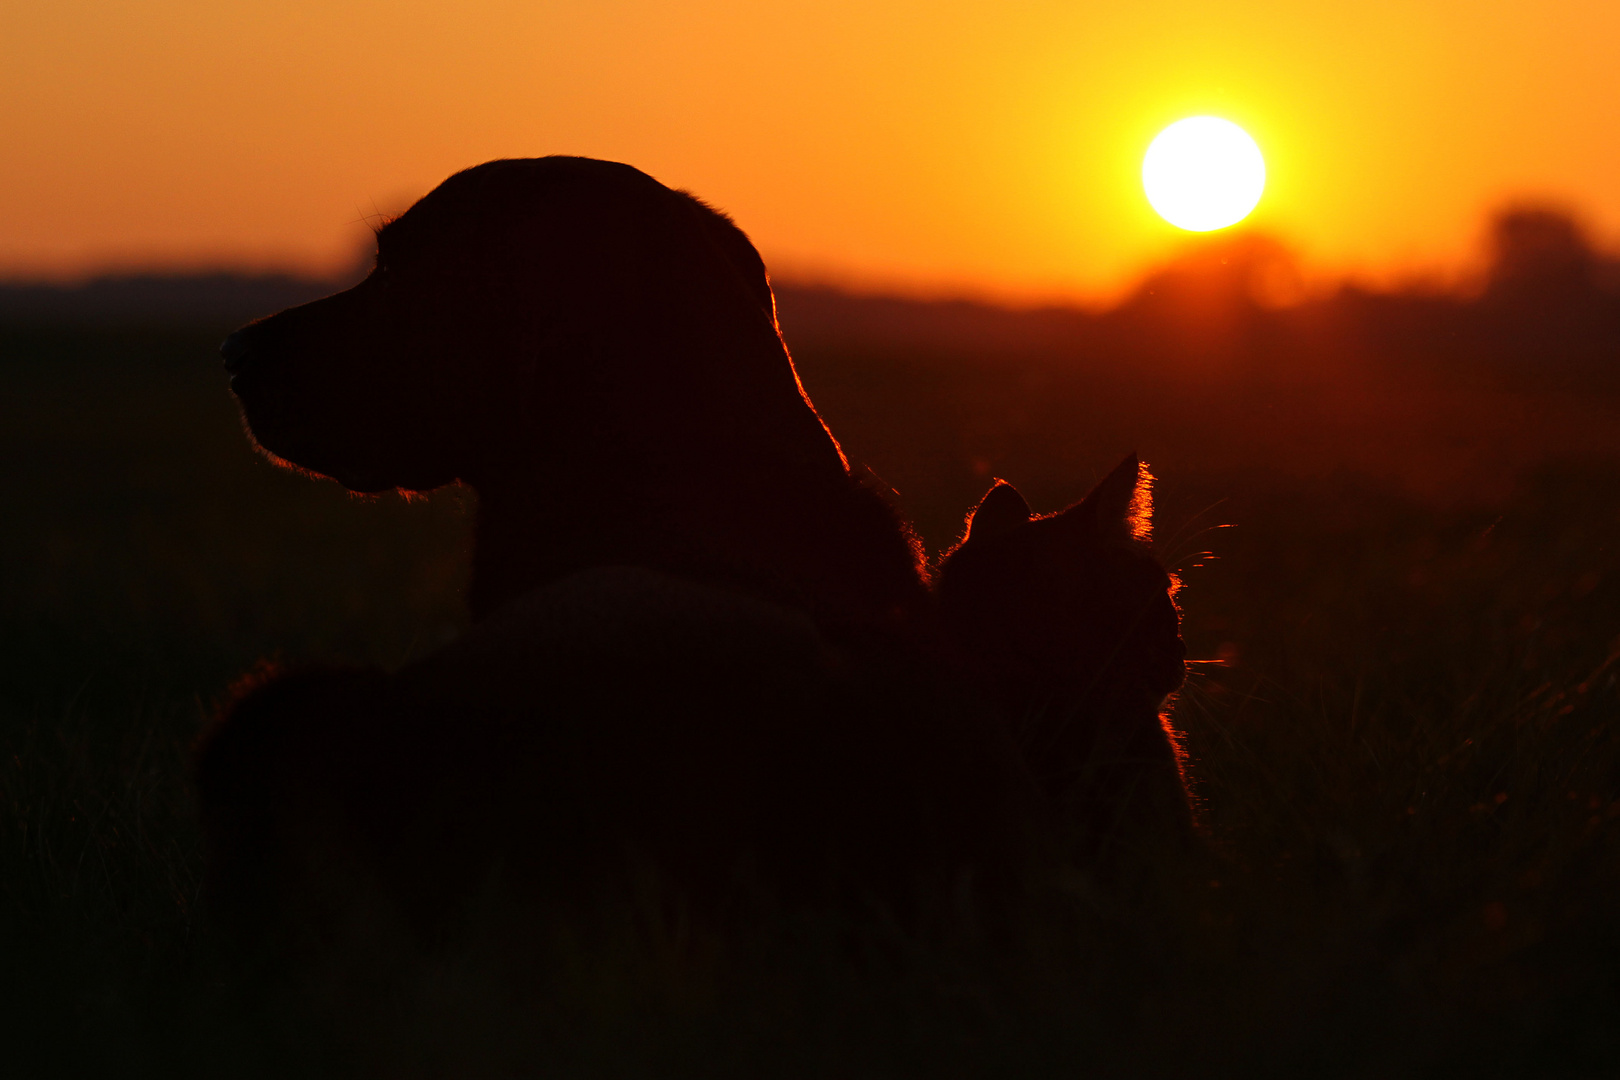 ~ Cat & Dog in the sunset ~